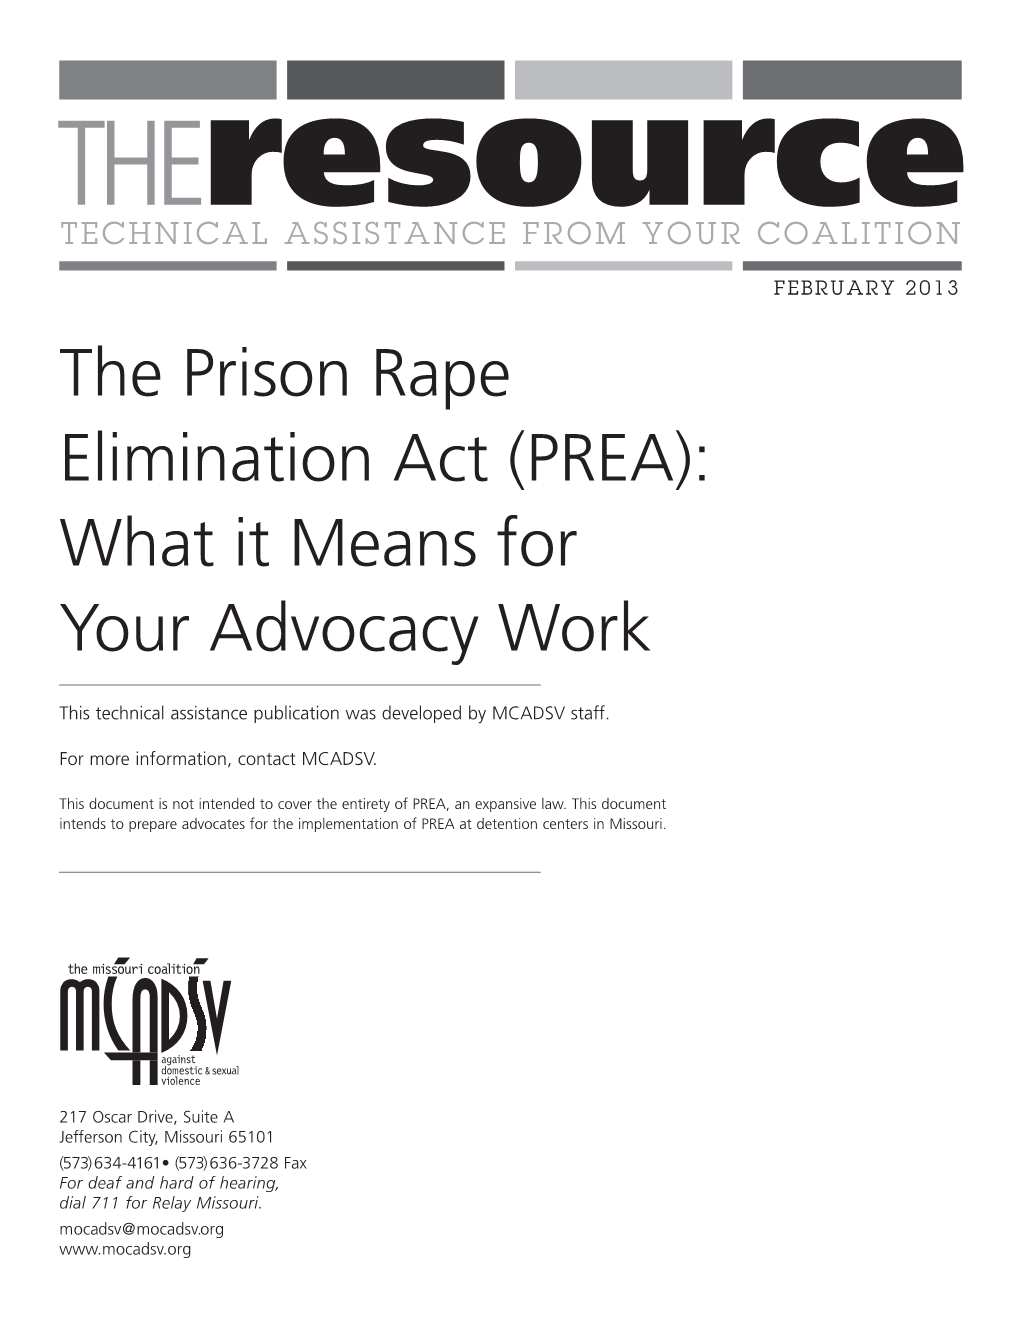 The Prison Rape Elimination Act (PREA): What It Means for Your Advocacy Work